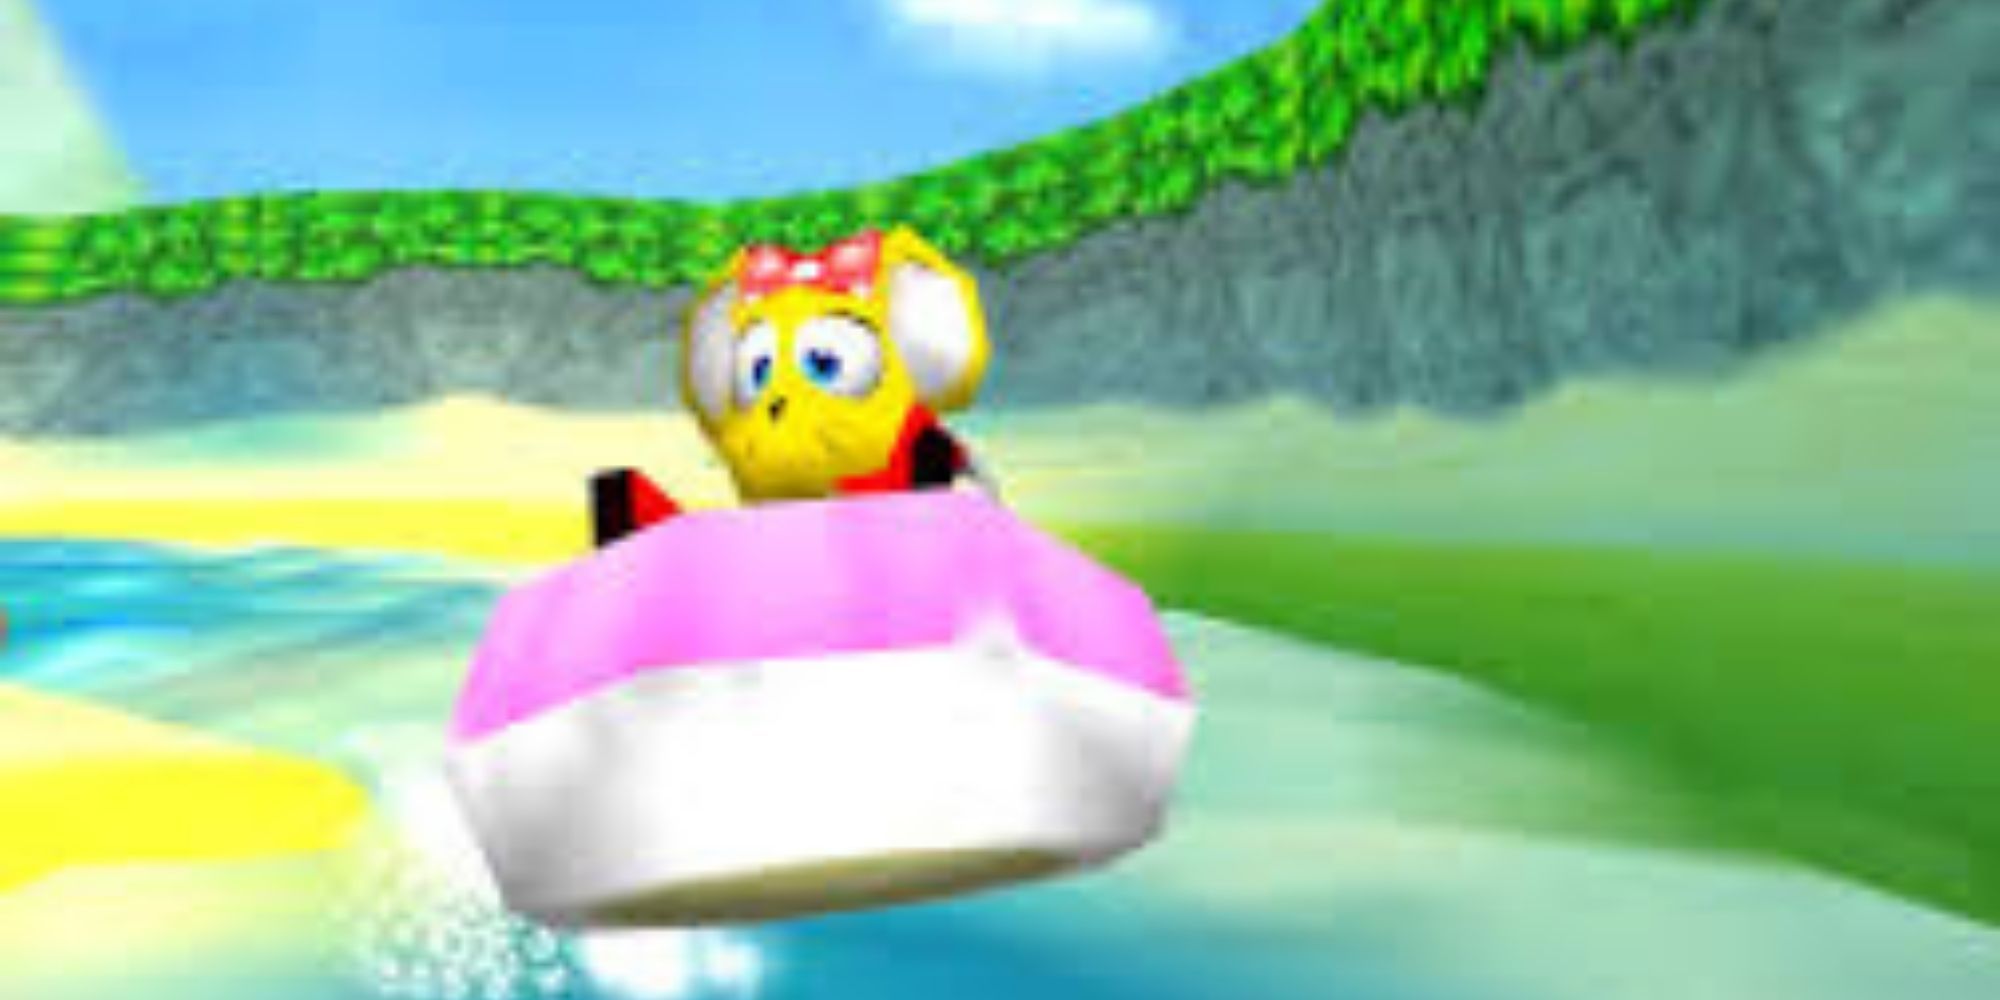 Diddy Kong Racing Pipsy Rides Her Hovercraft In A Small Stream Outside